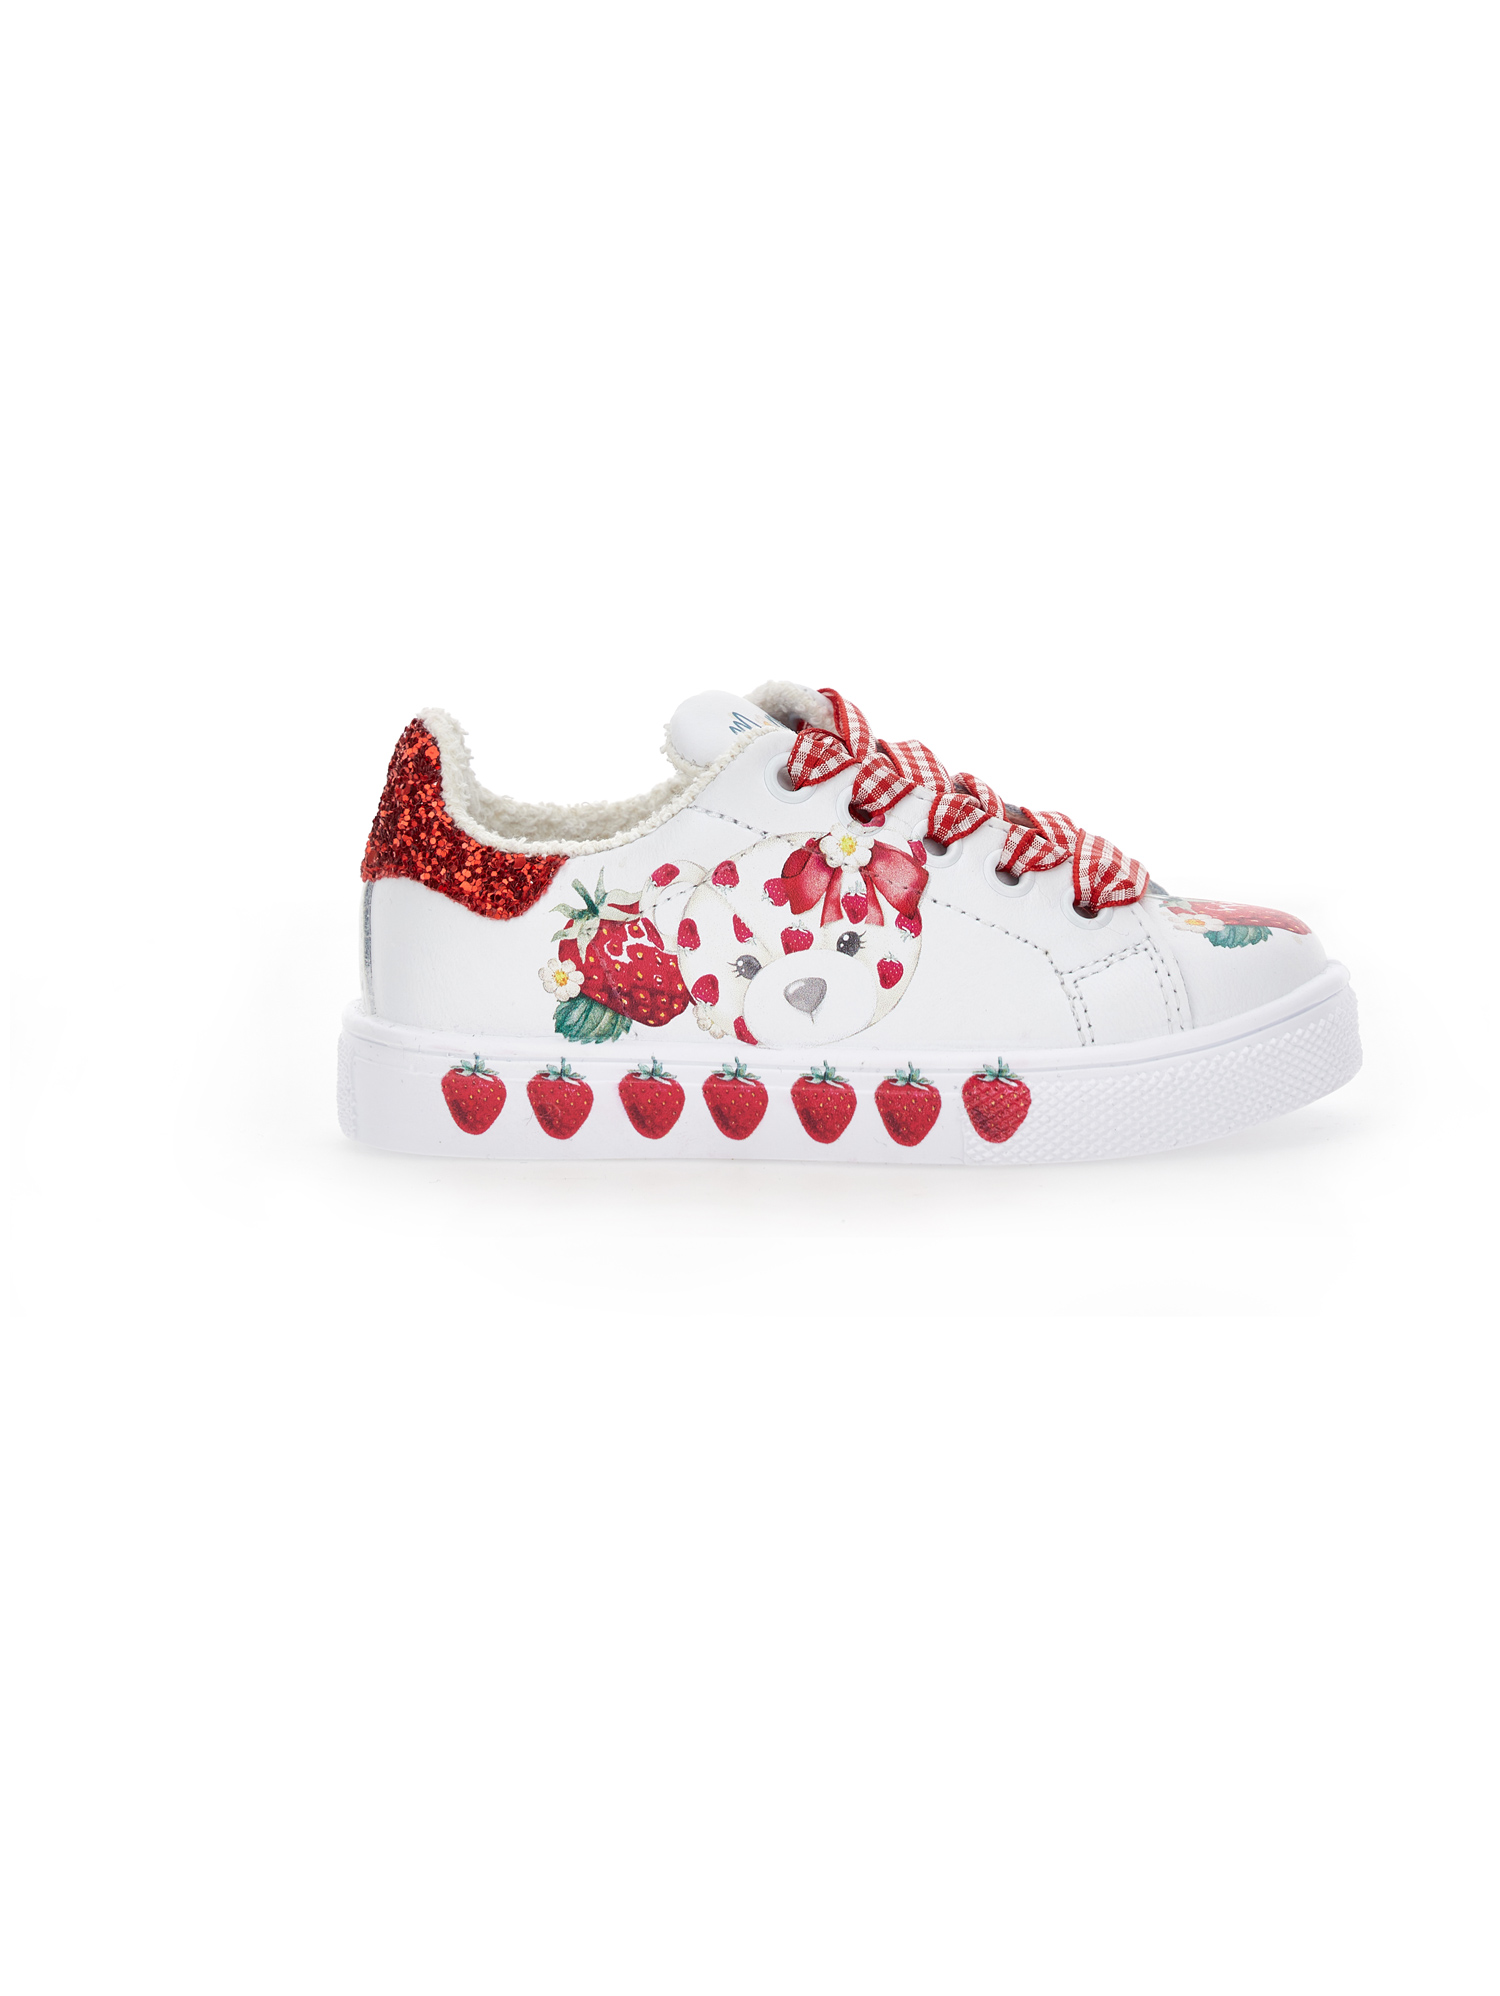 Monnalisa Strawberry Print Sneakers In White + Red